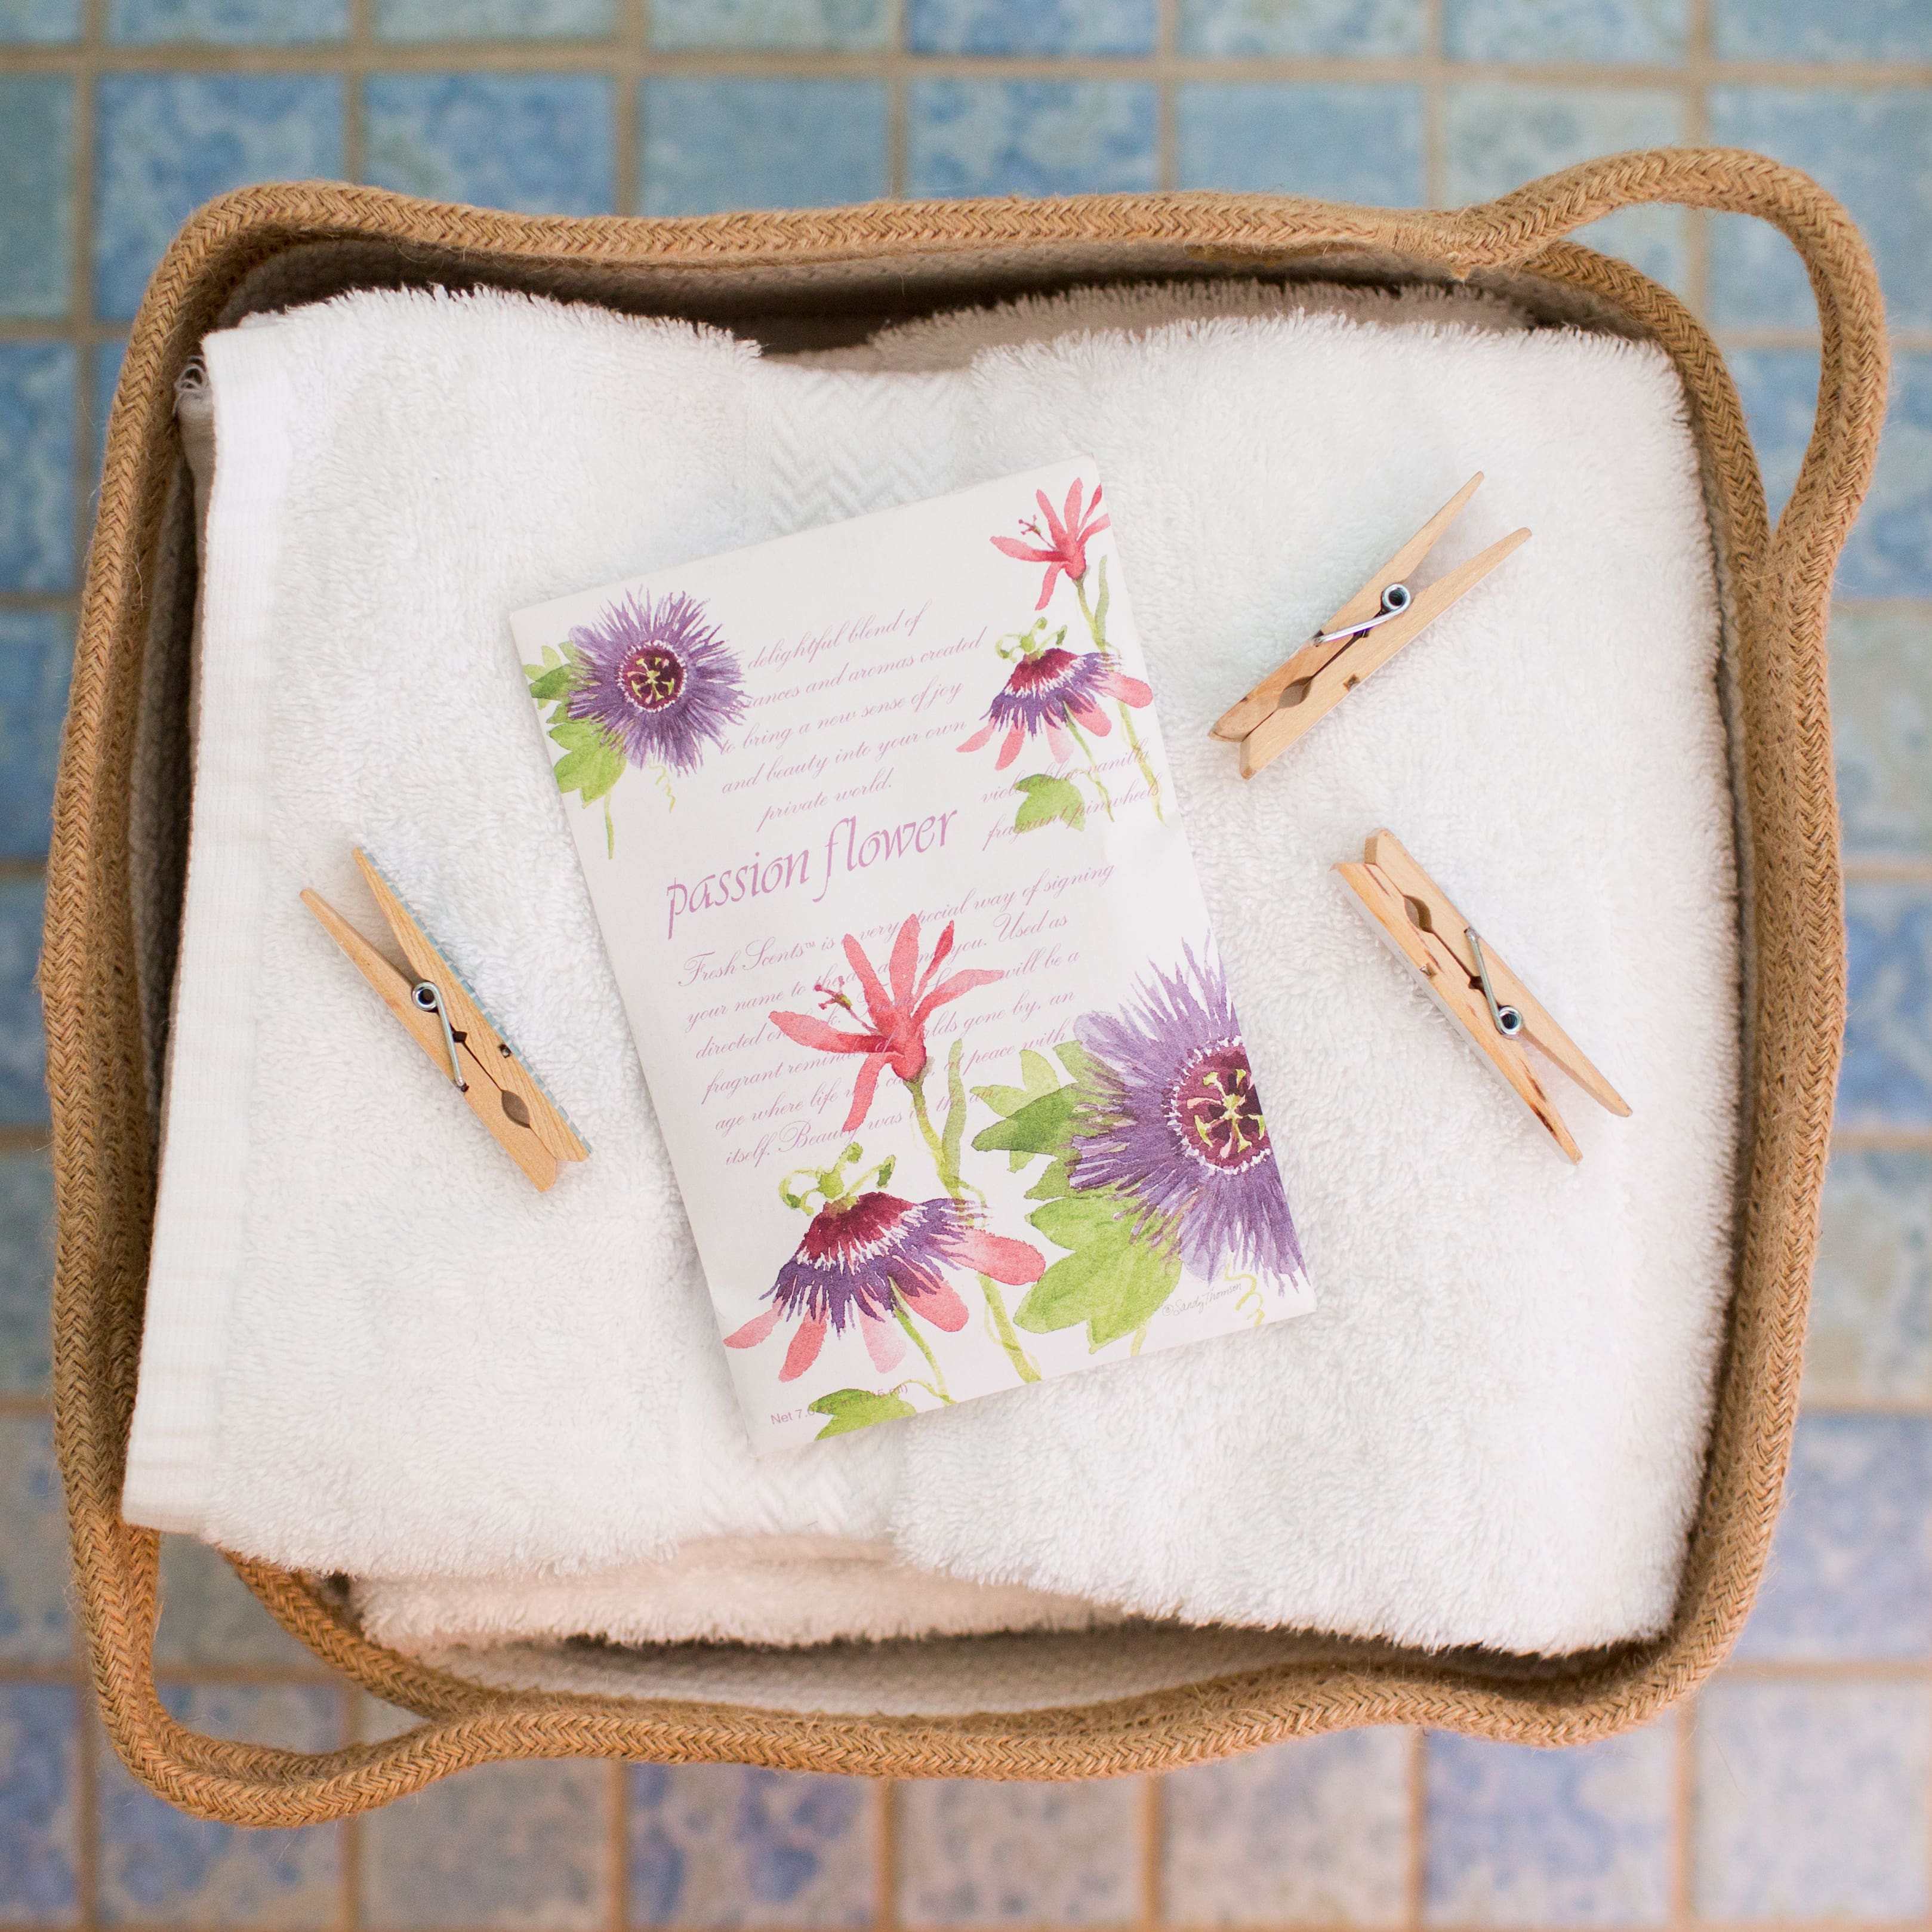 Willowbrook&#xAE; Fresh Scents&#x2122; Passion Flower Fragrance Sachets, 3ct.